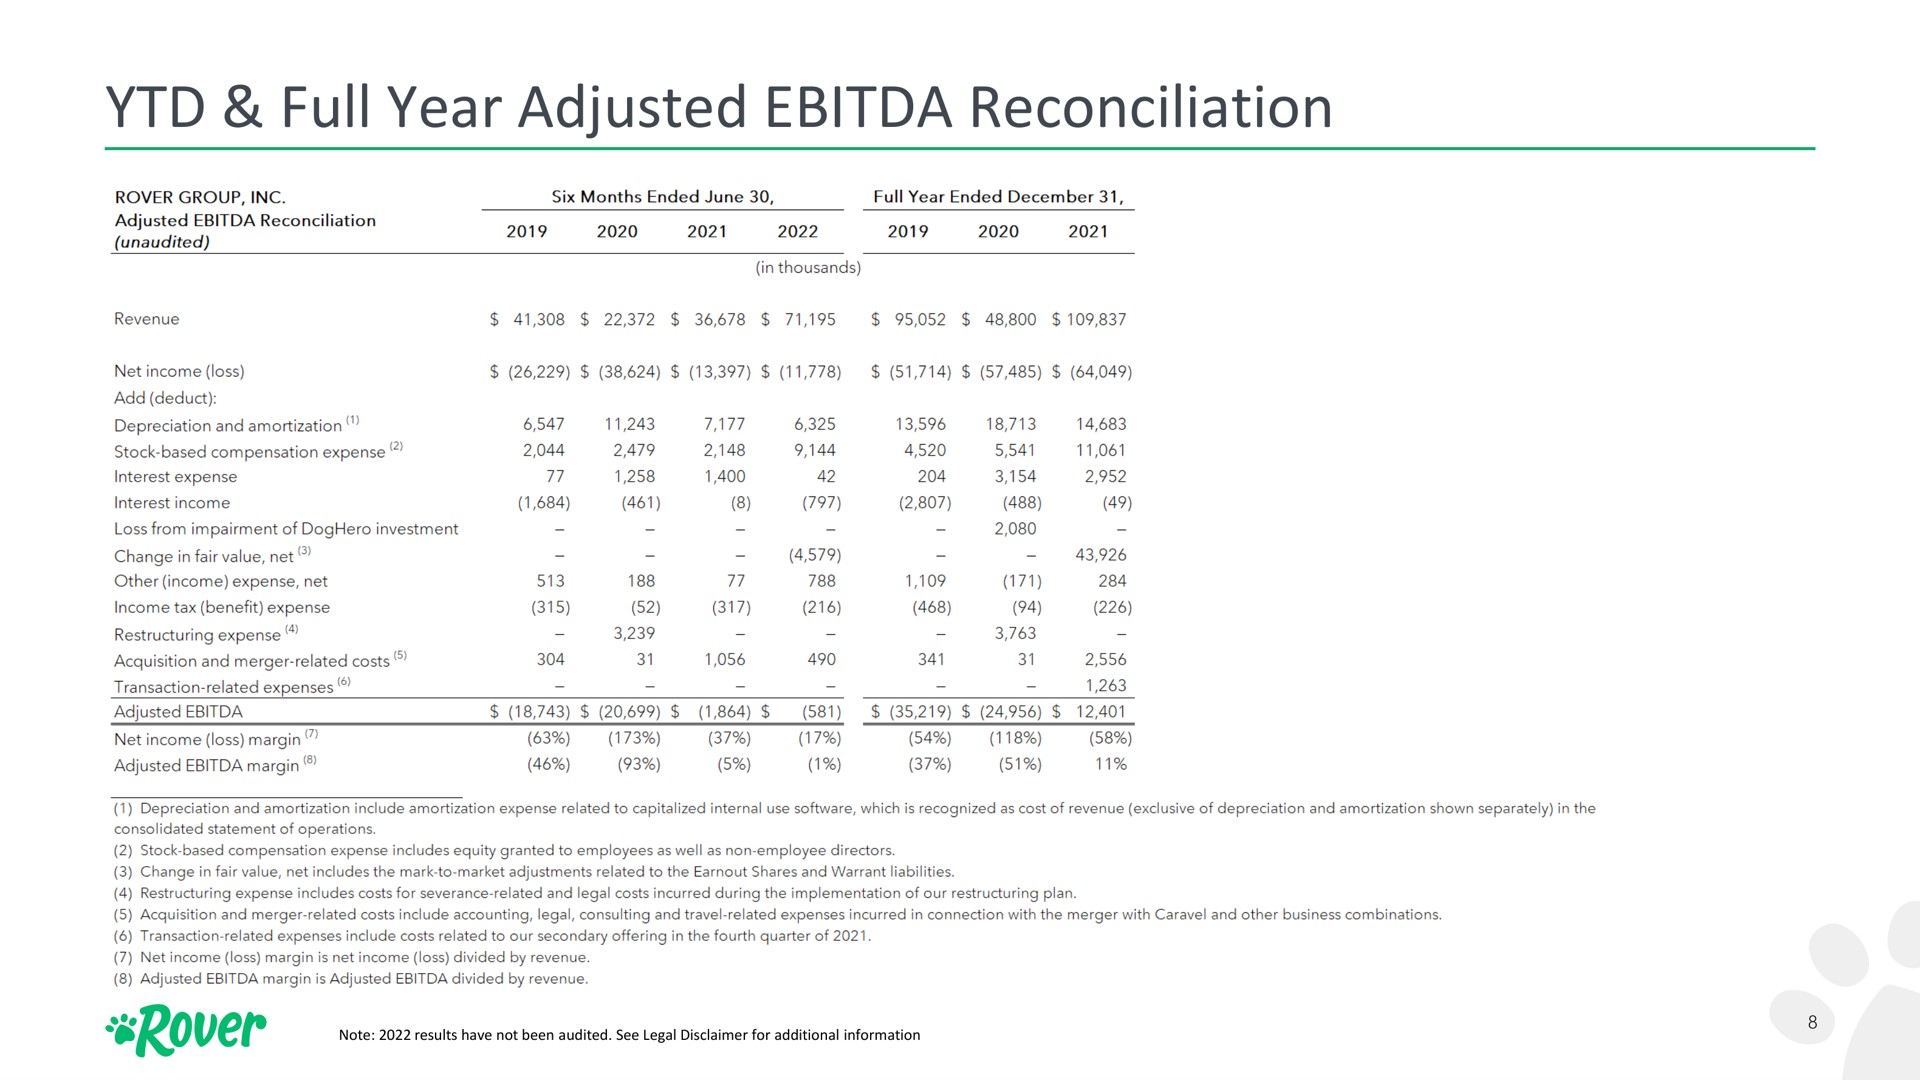 full year adjusted reconciliation lation | Rover